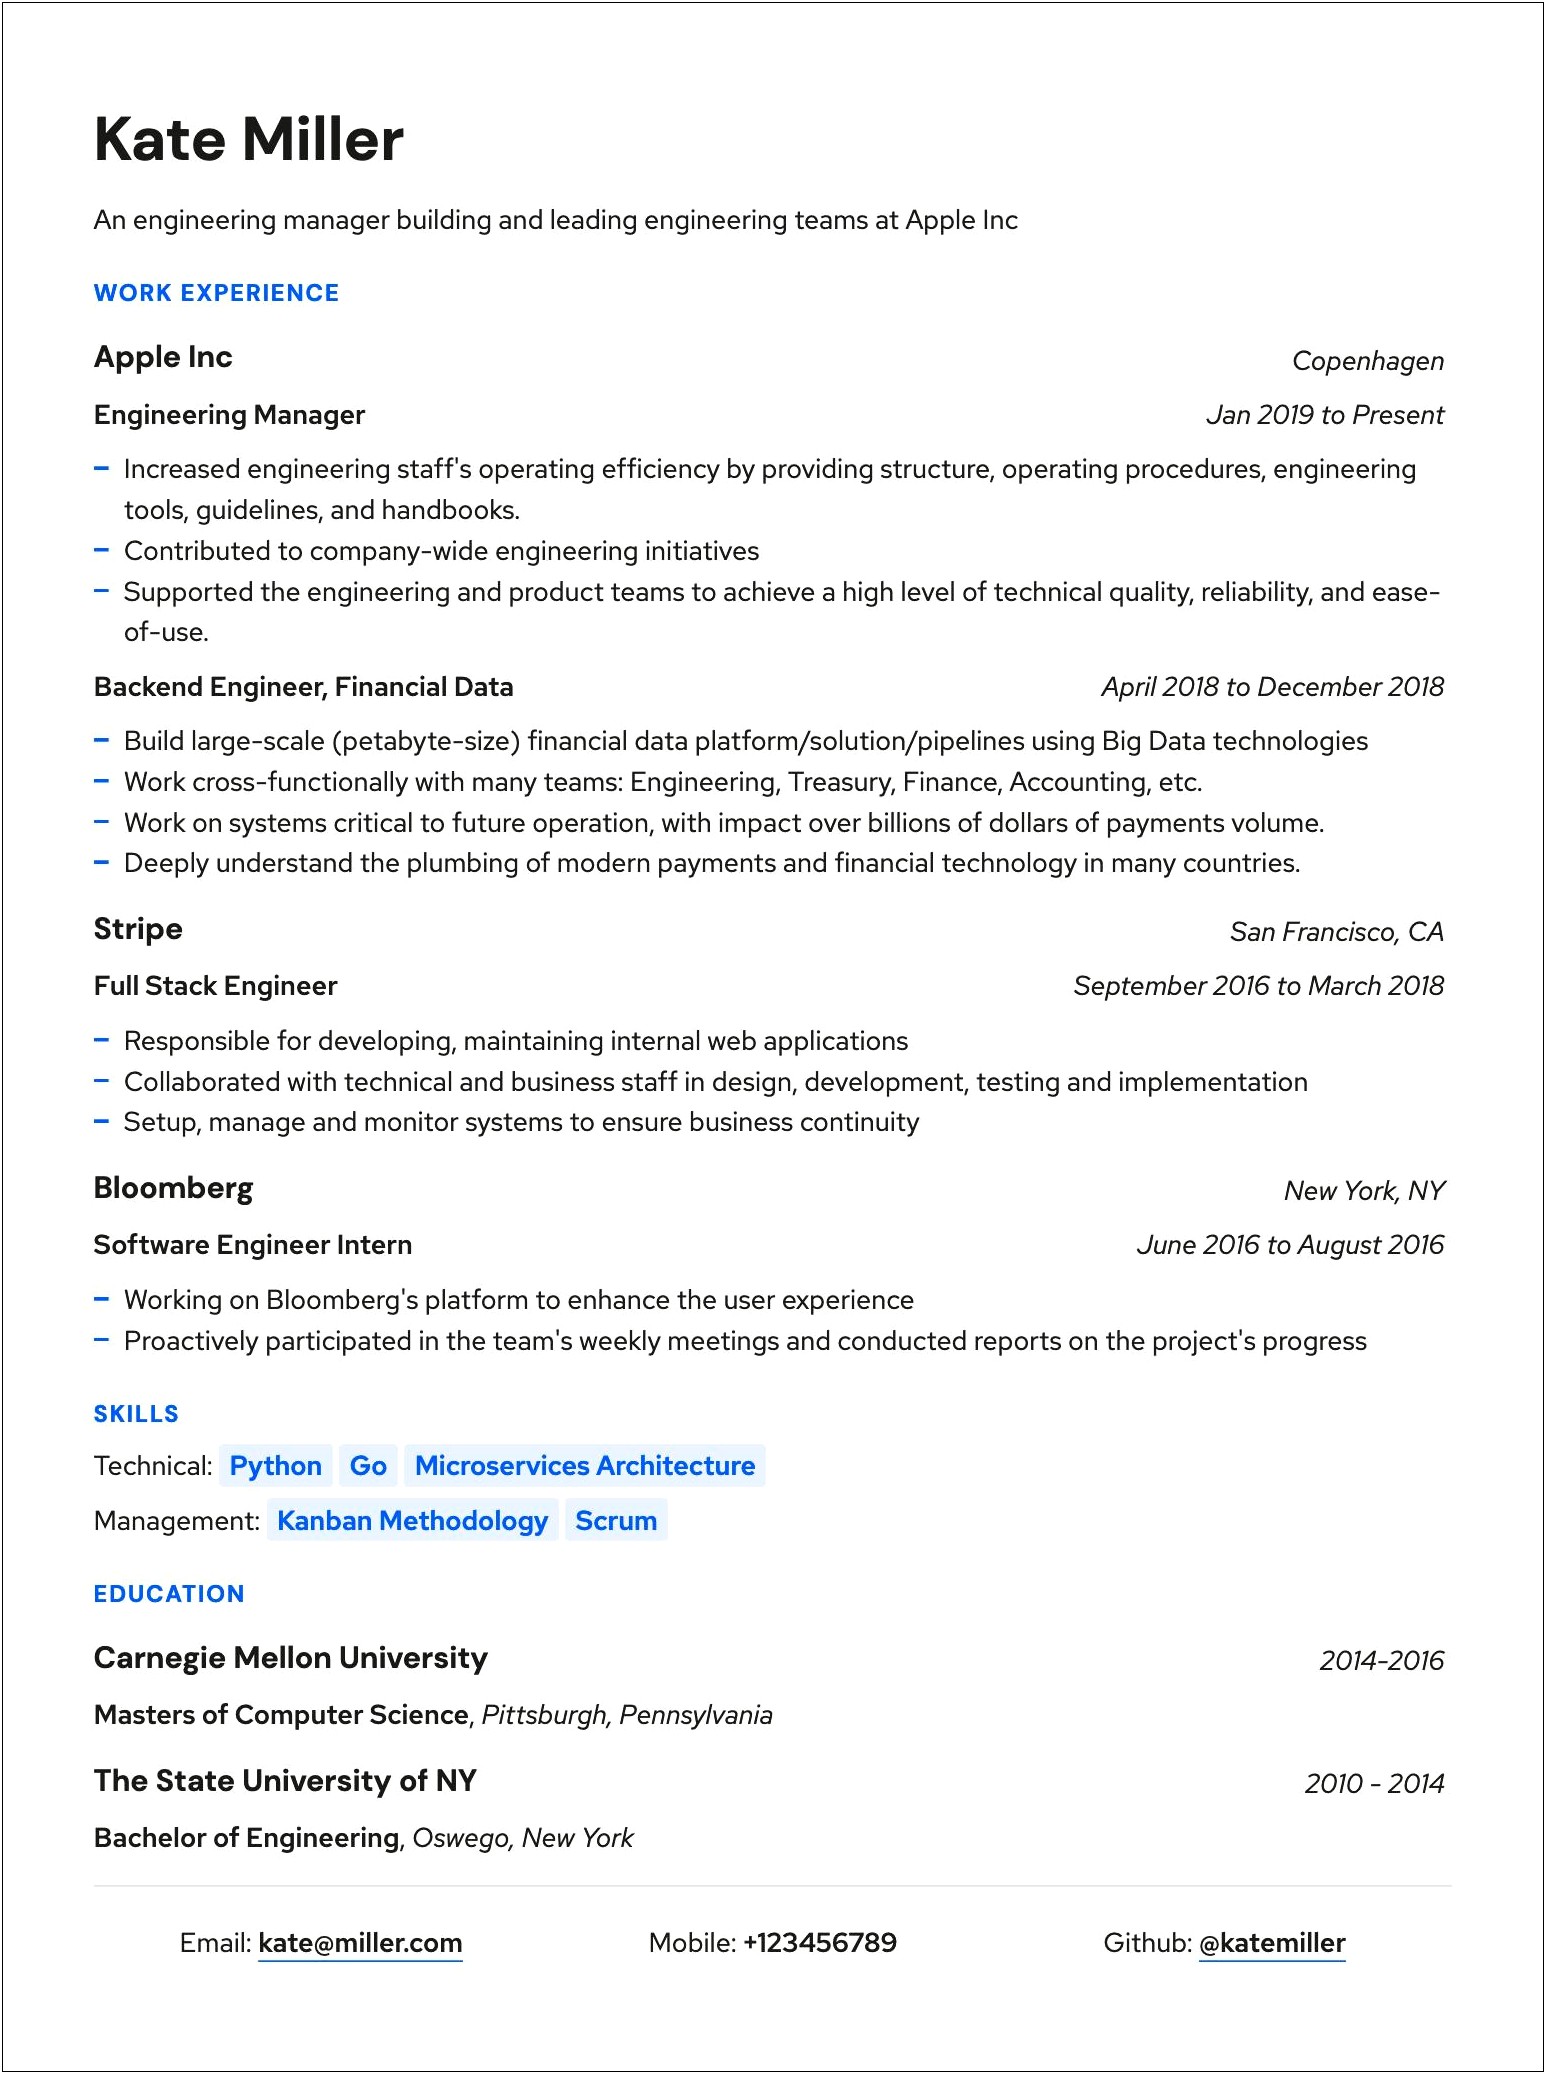 Engineering Project Manager At Apple Resume